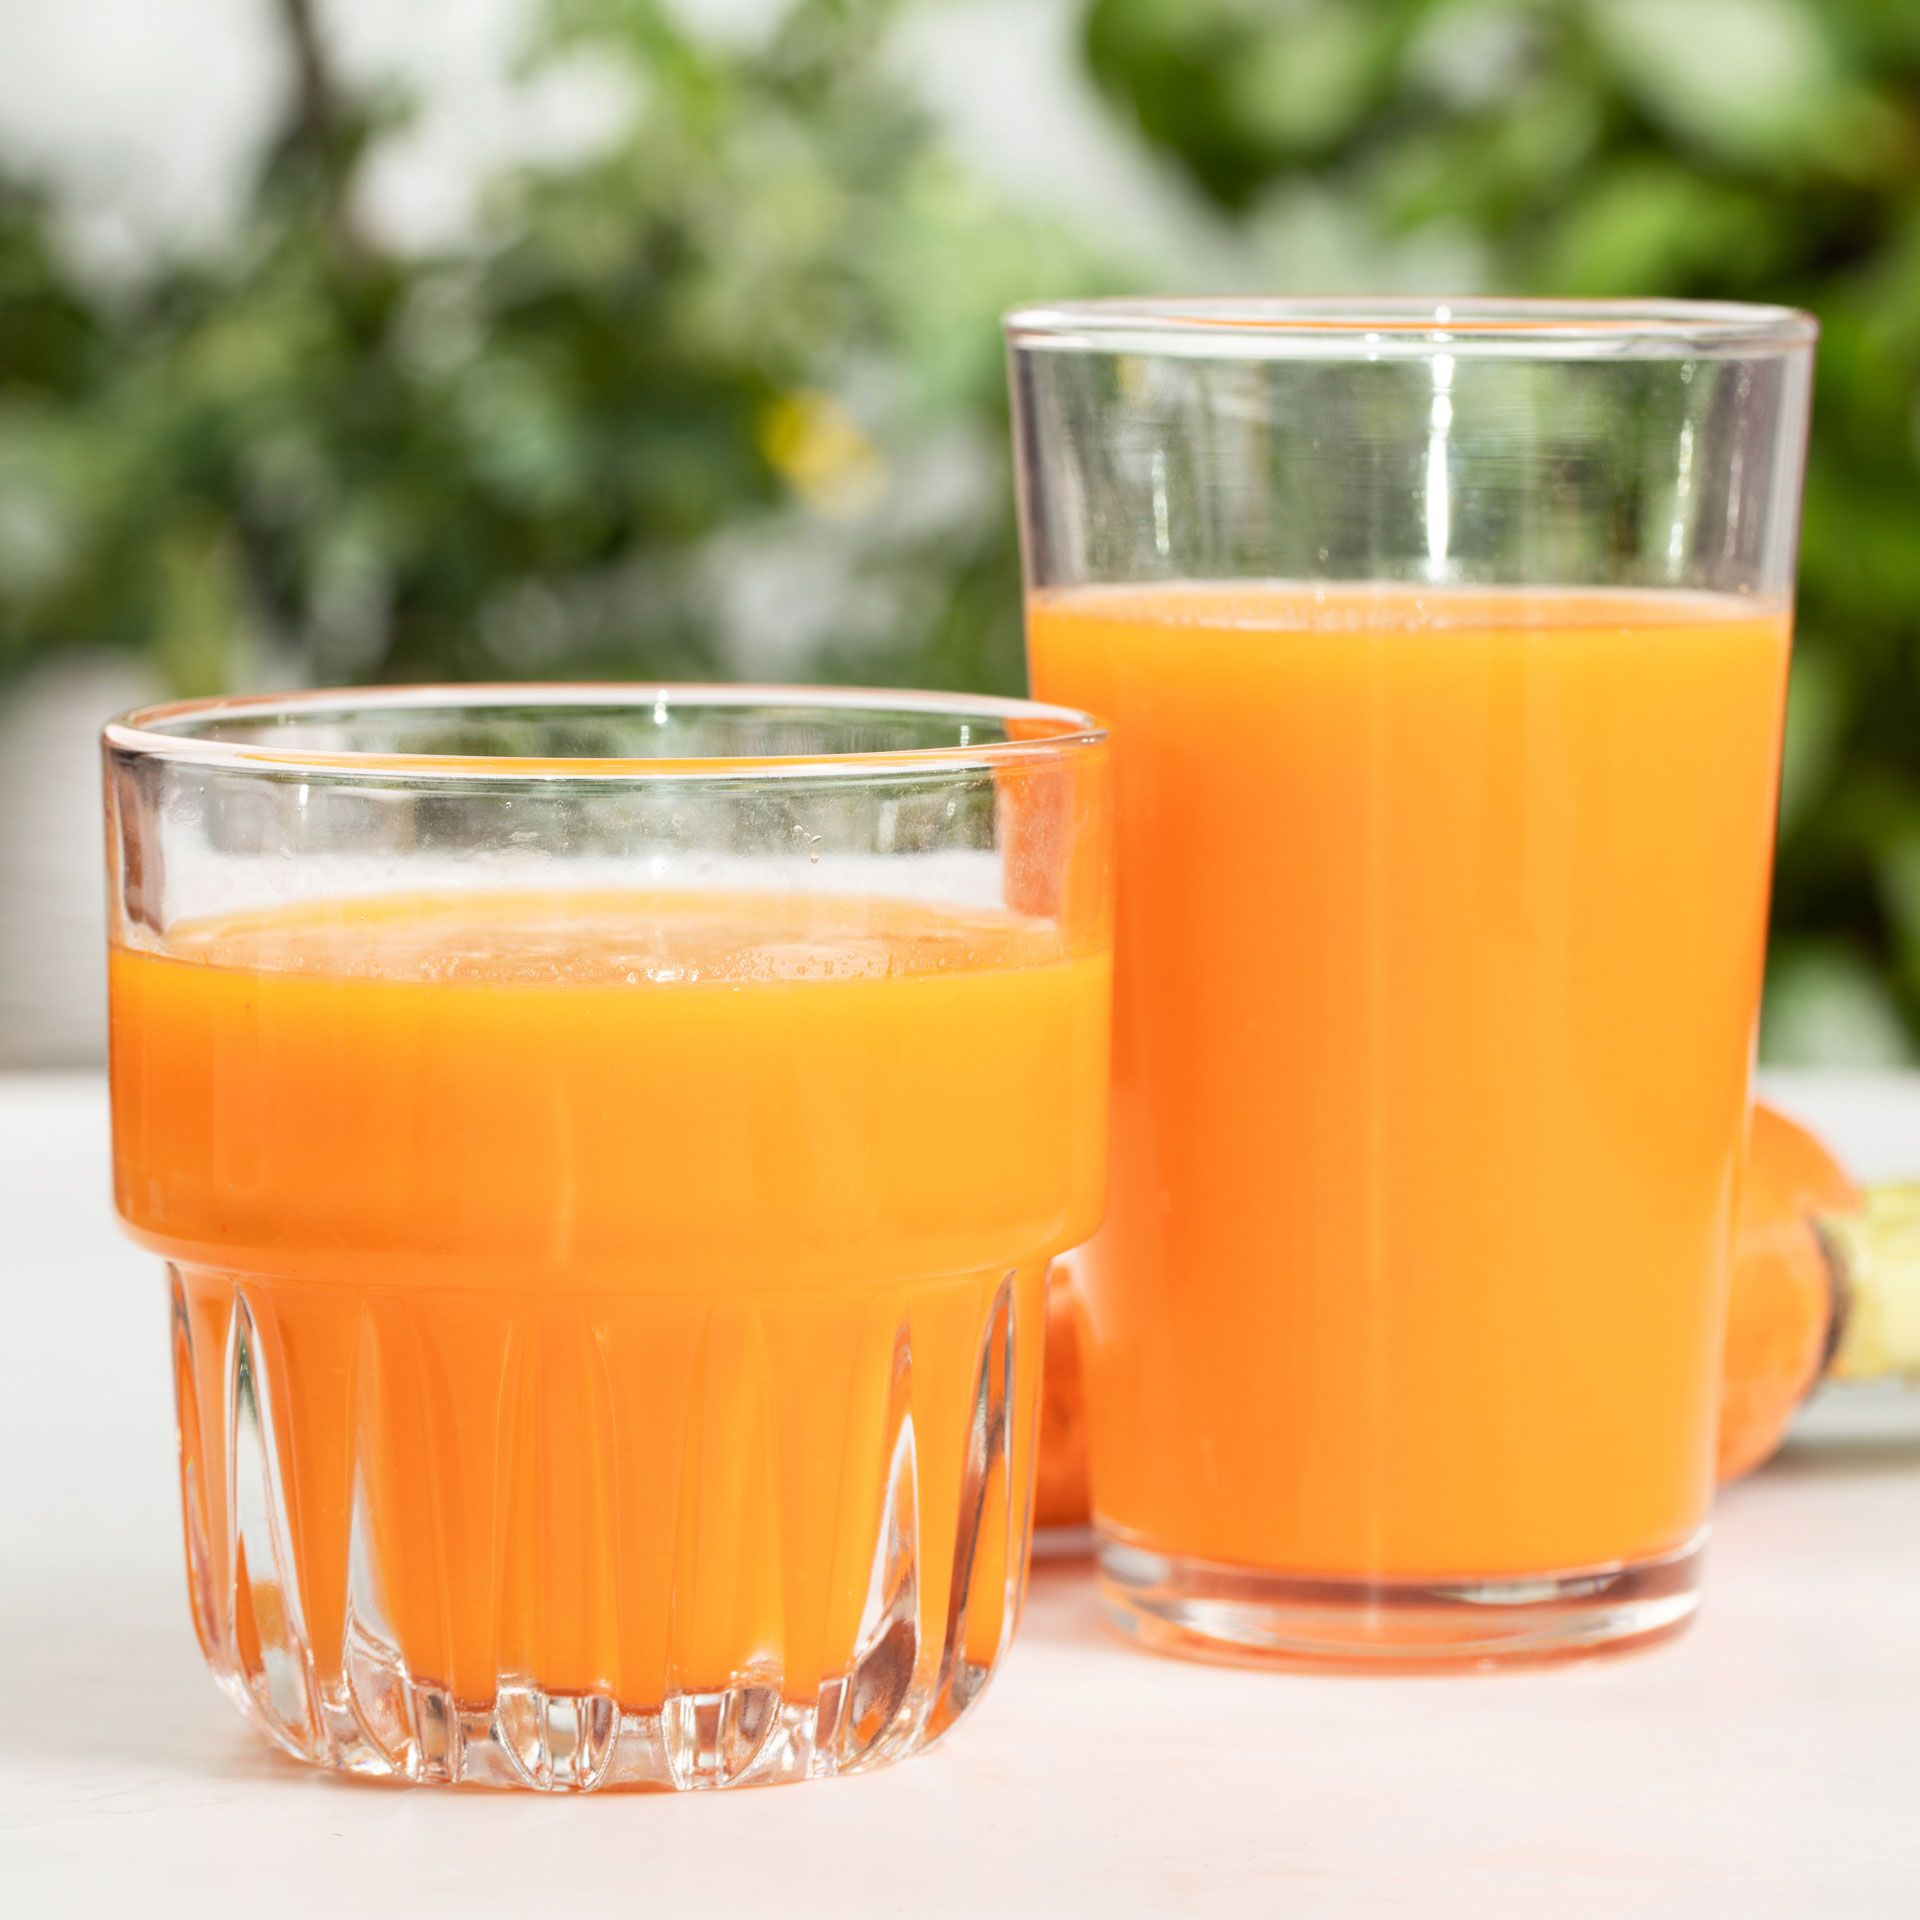 Make Good Carrot Juice By Hand From Buton City